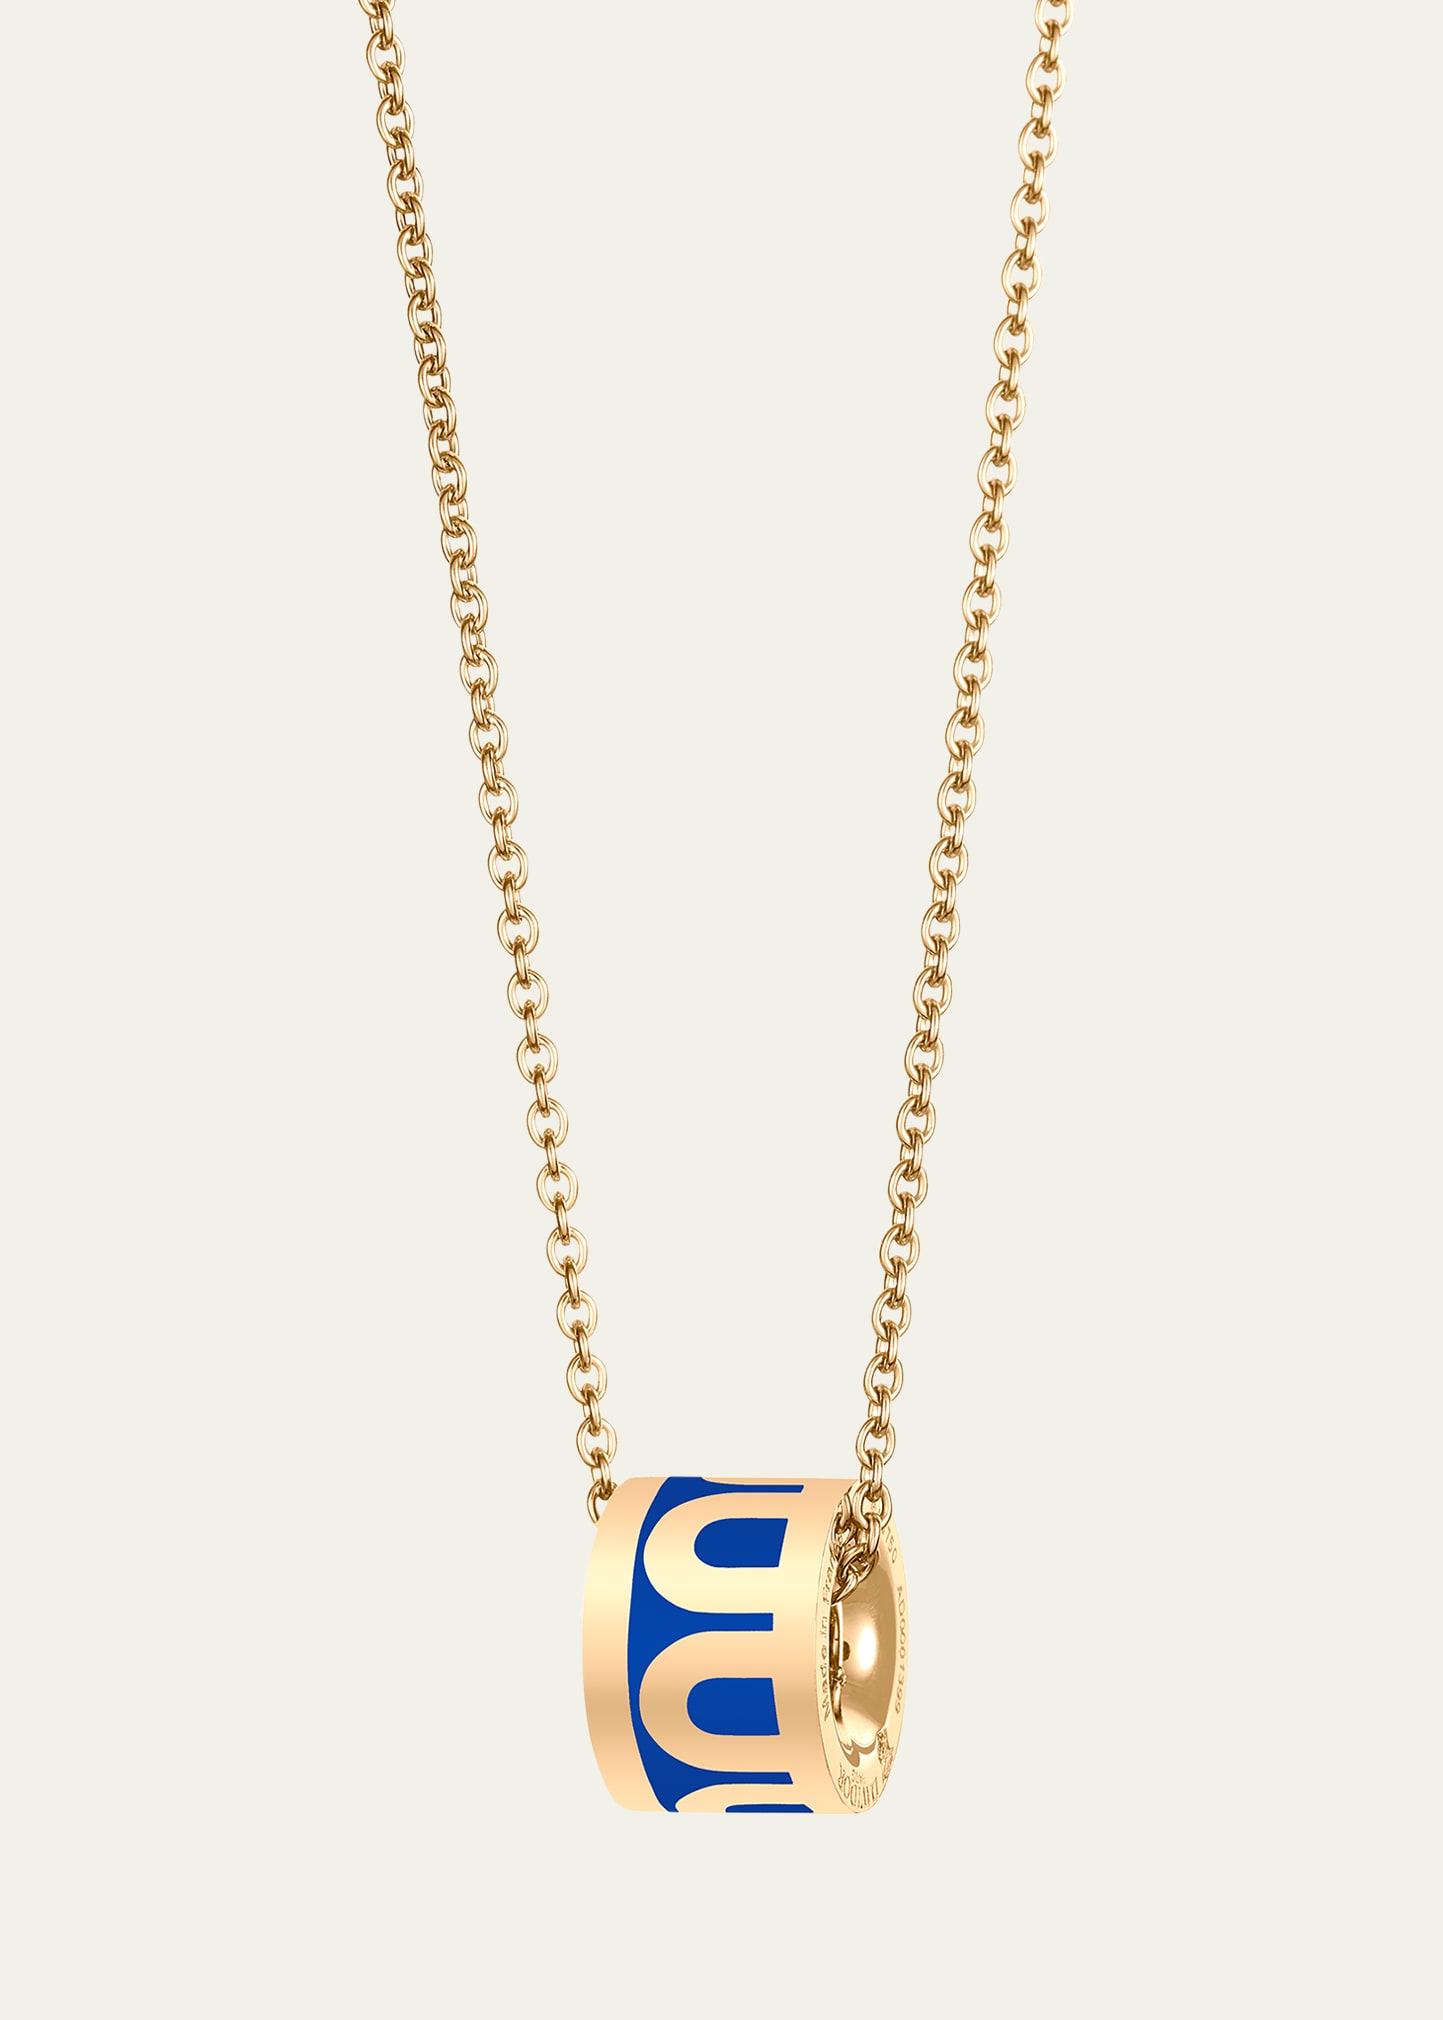 Davidor L'arc De  Bead Necklace In 18k Yellow Gold With Riviera Lacquered Ceramic